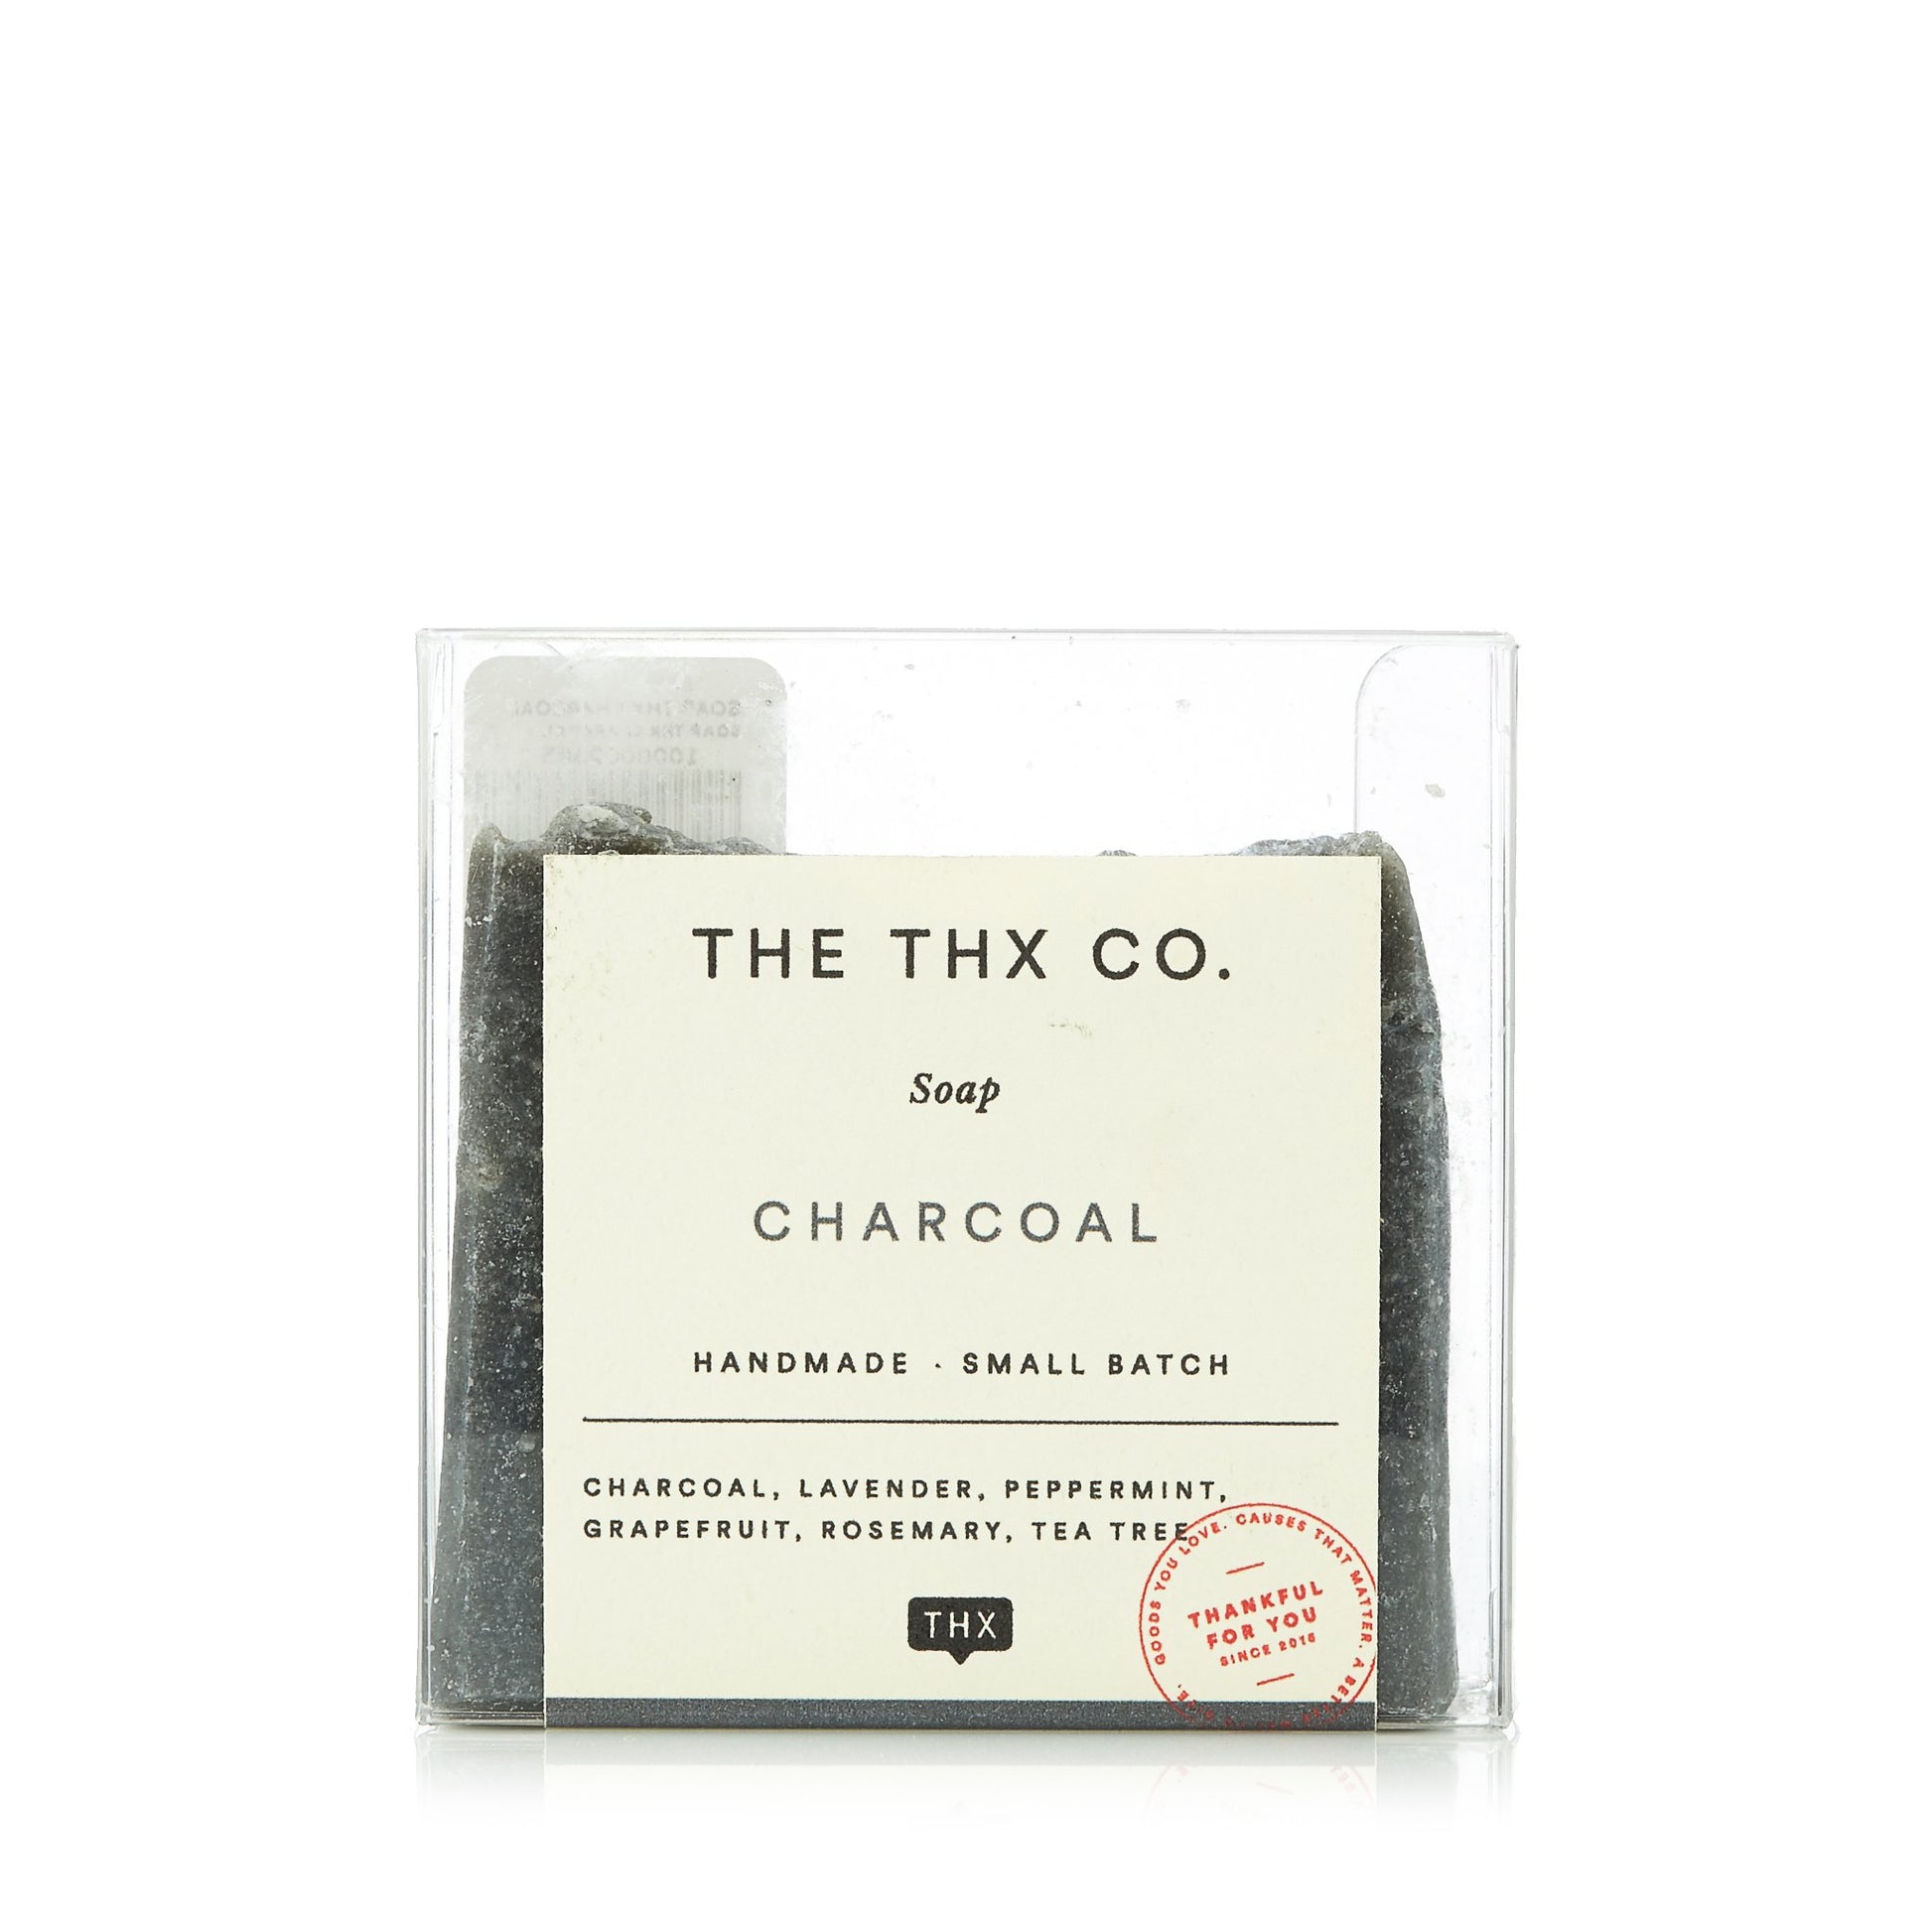 Charcoal Hand Made Soap by The Thx Co., Product image 2